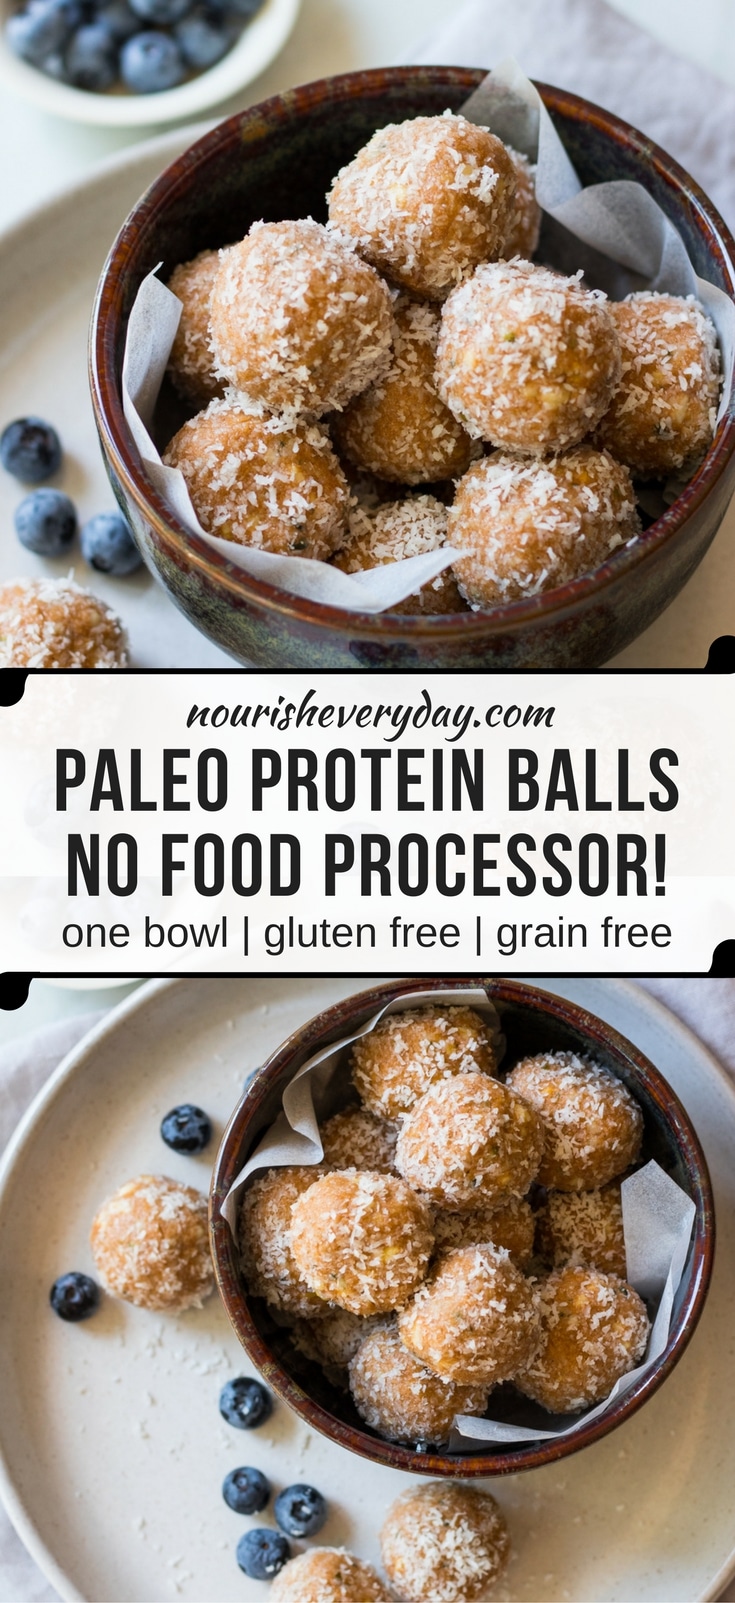 No Food Processor Paleo Protein Balls! One bowl, quick mix, gluten free and grain free. A healthy snack made with nut butter, protein powder, hemp seeds, honey and coconut. #proteinballs #energyballs #paleo #glutenfree